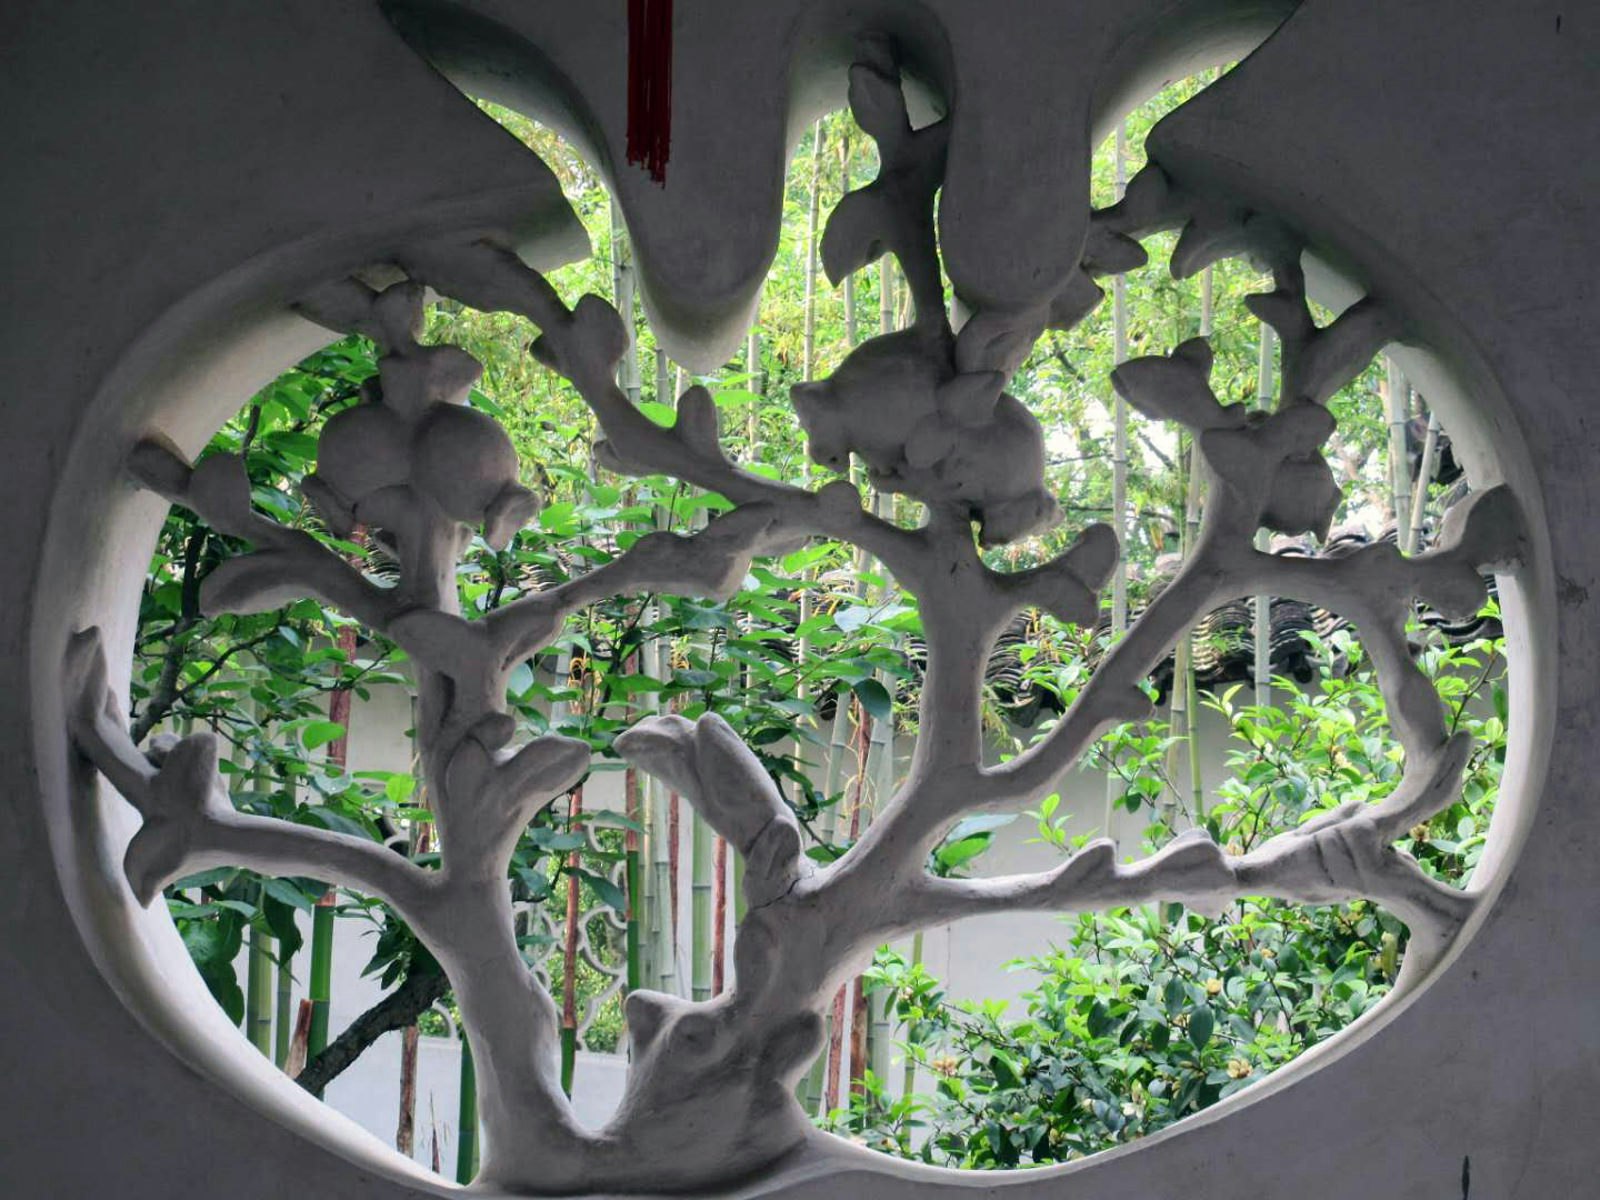 A white-washed window with delicate grating shaped like a tree looks out onto trees in the garden. Suzhou's classical gardens have details like this window that create picturesque scenes as you wander through © Tess Humphrys / Lonely Planet